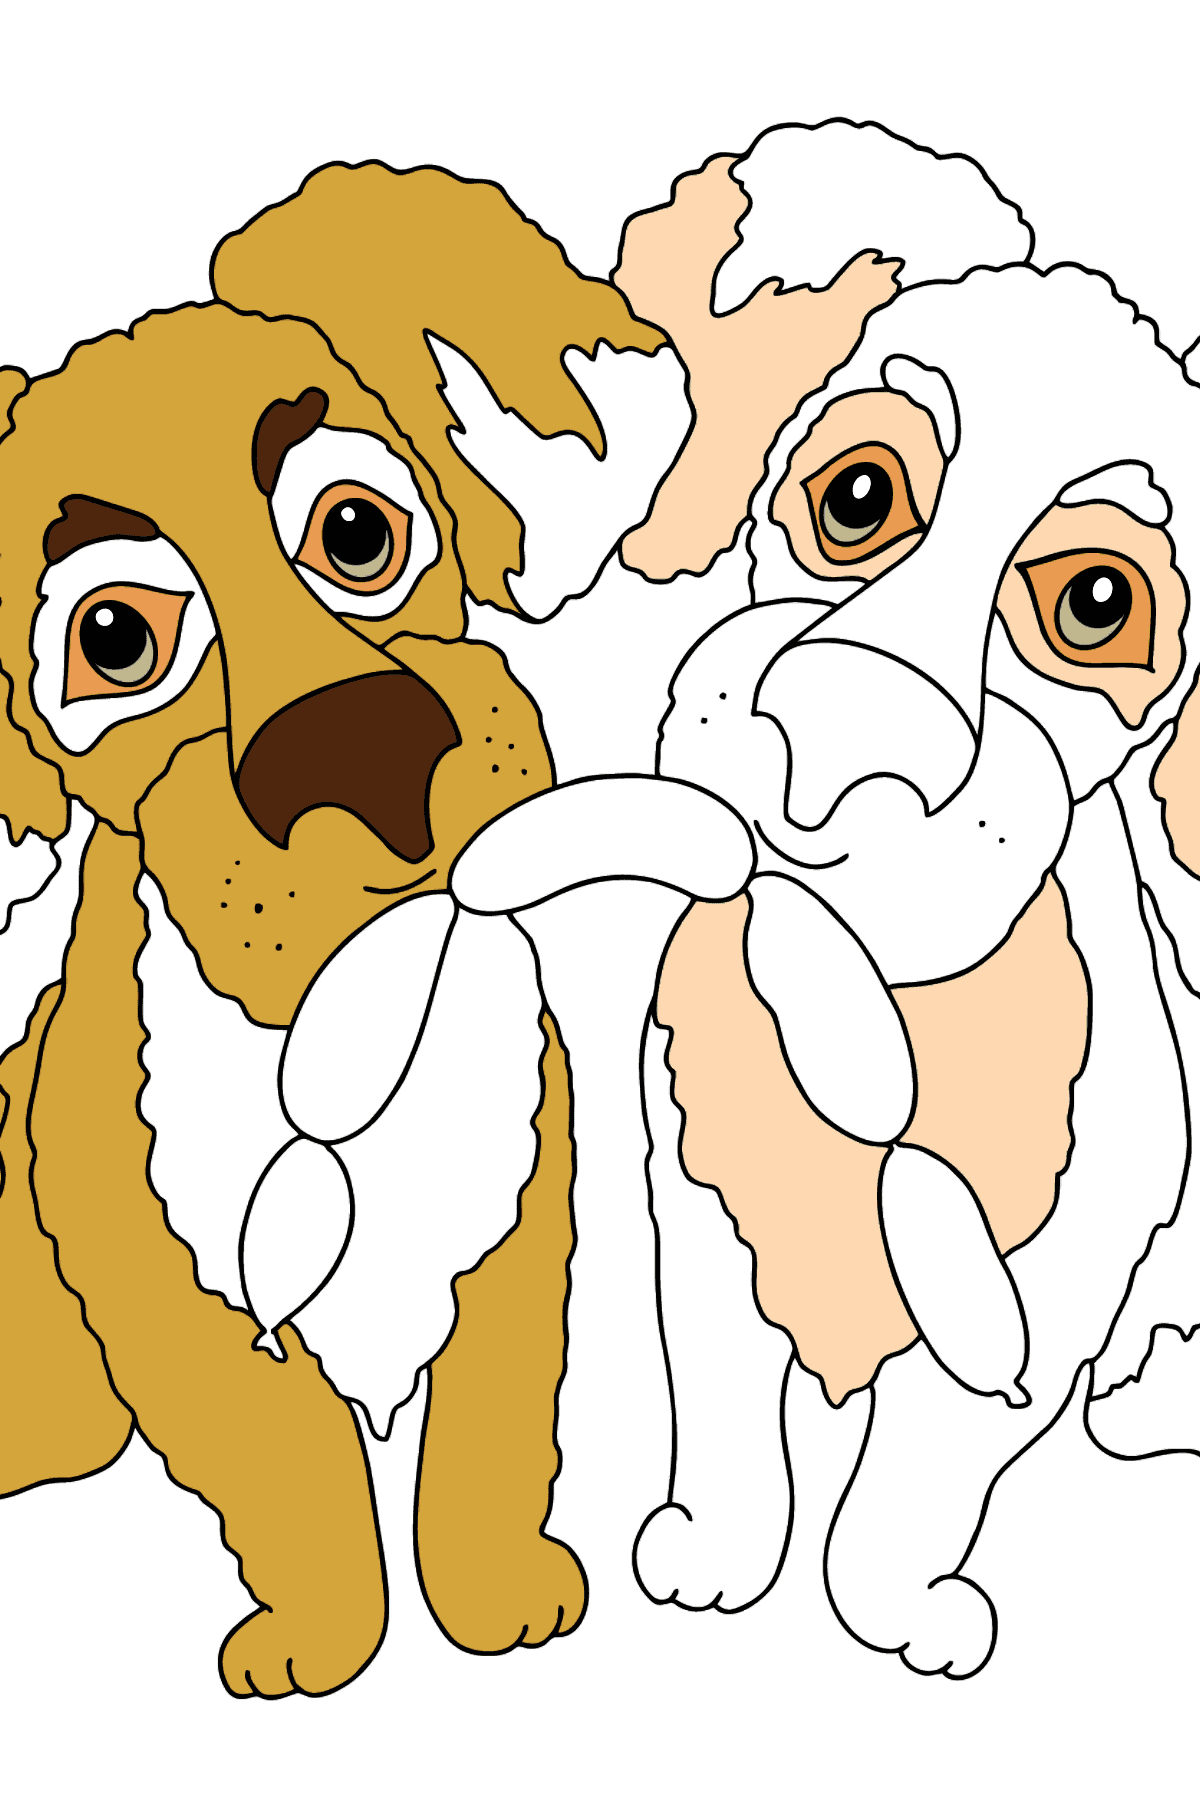 Coloring Page - Dogs Can't Share Sausages - Coloring Pages for Kids